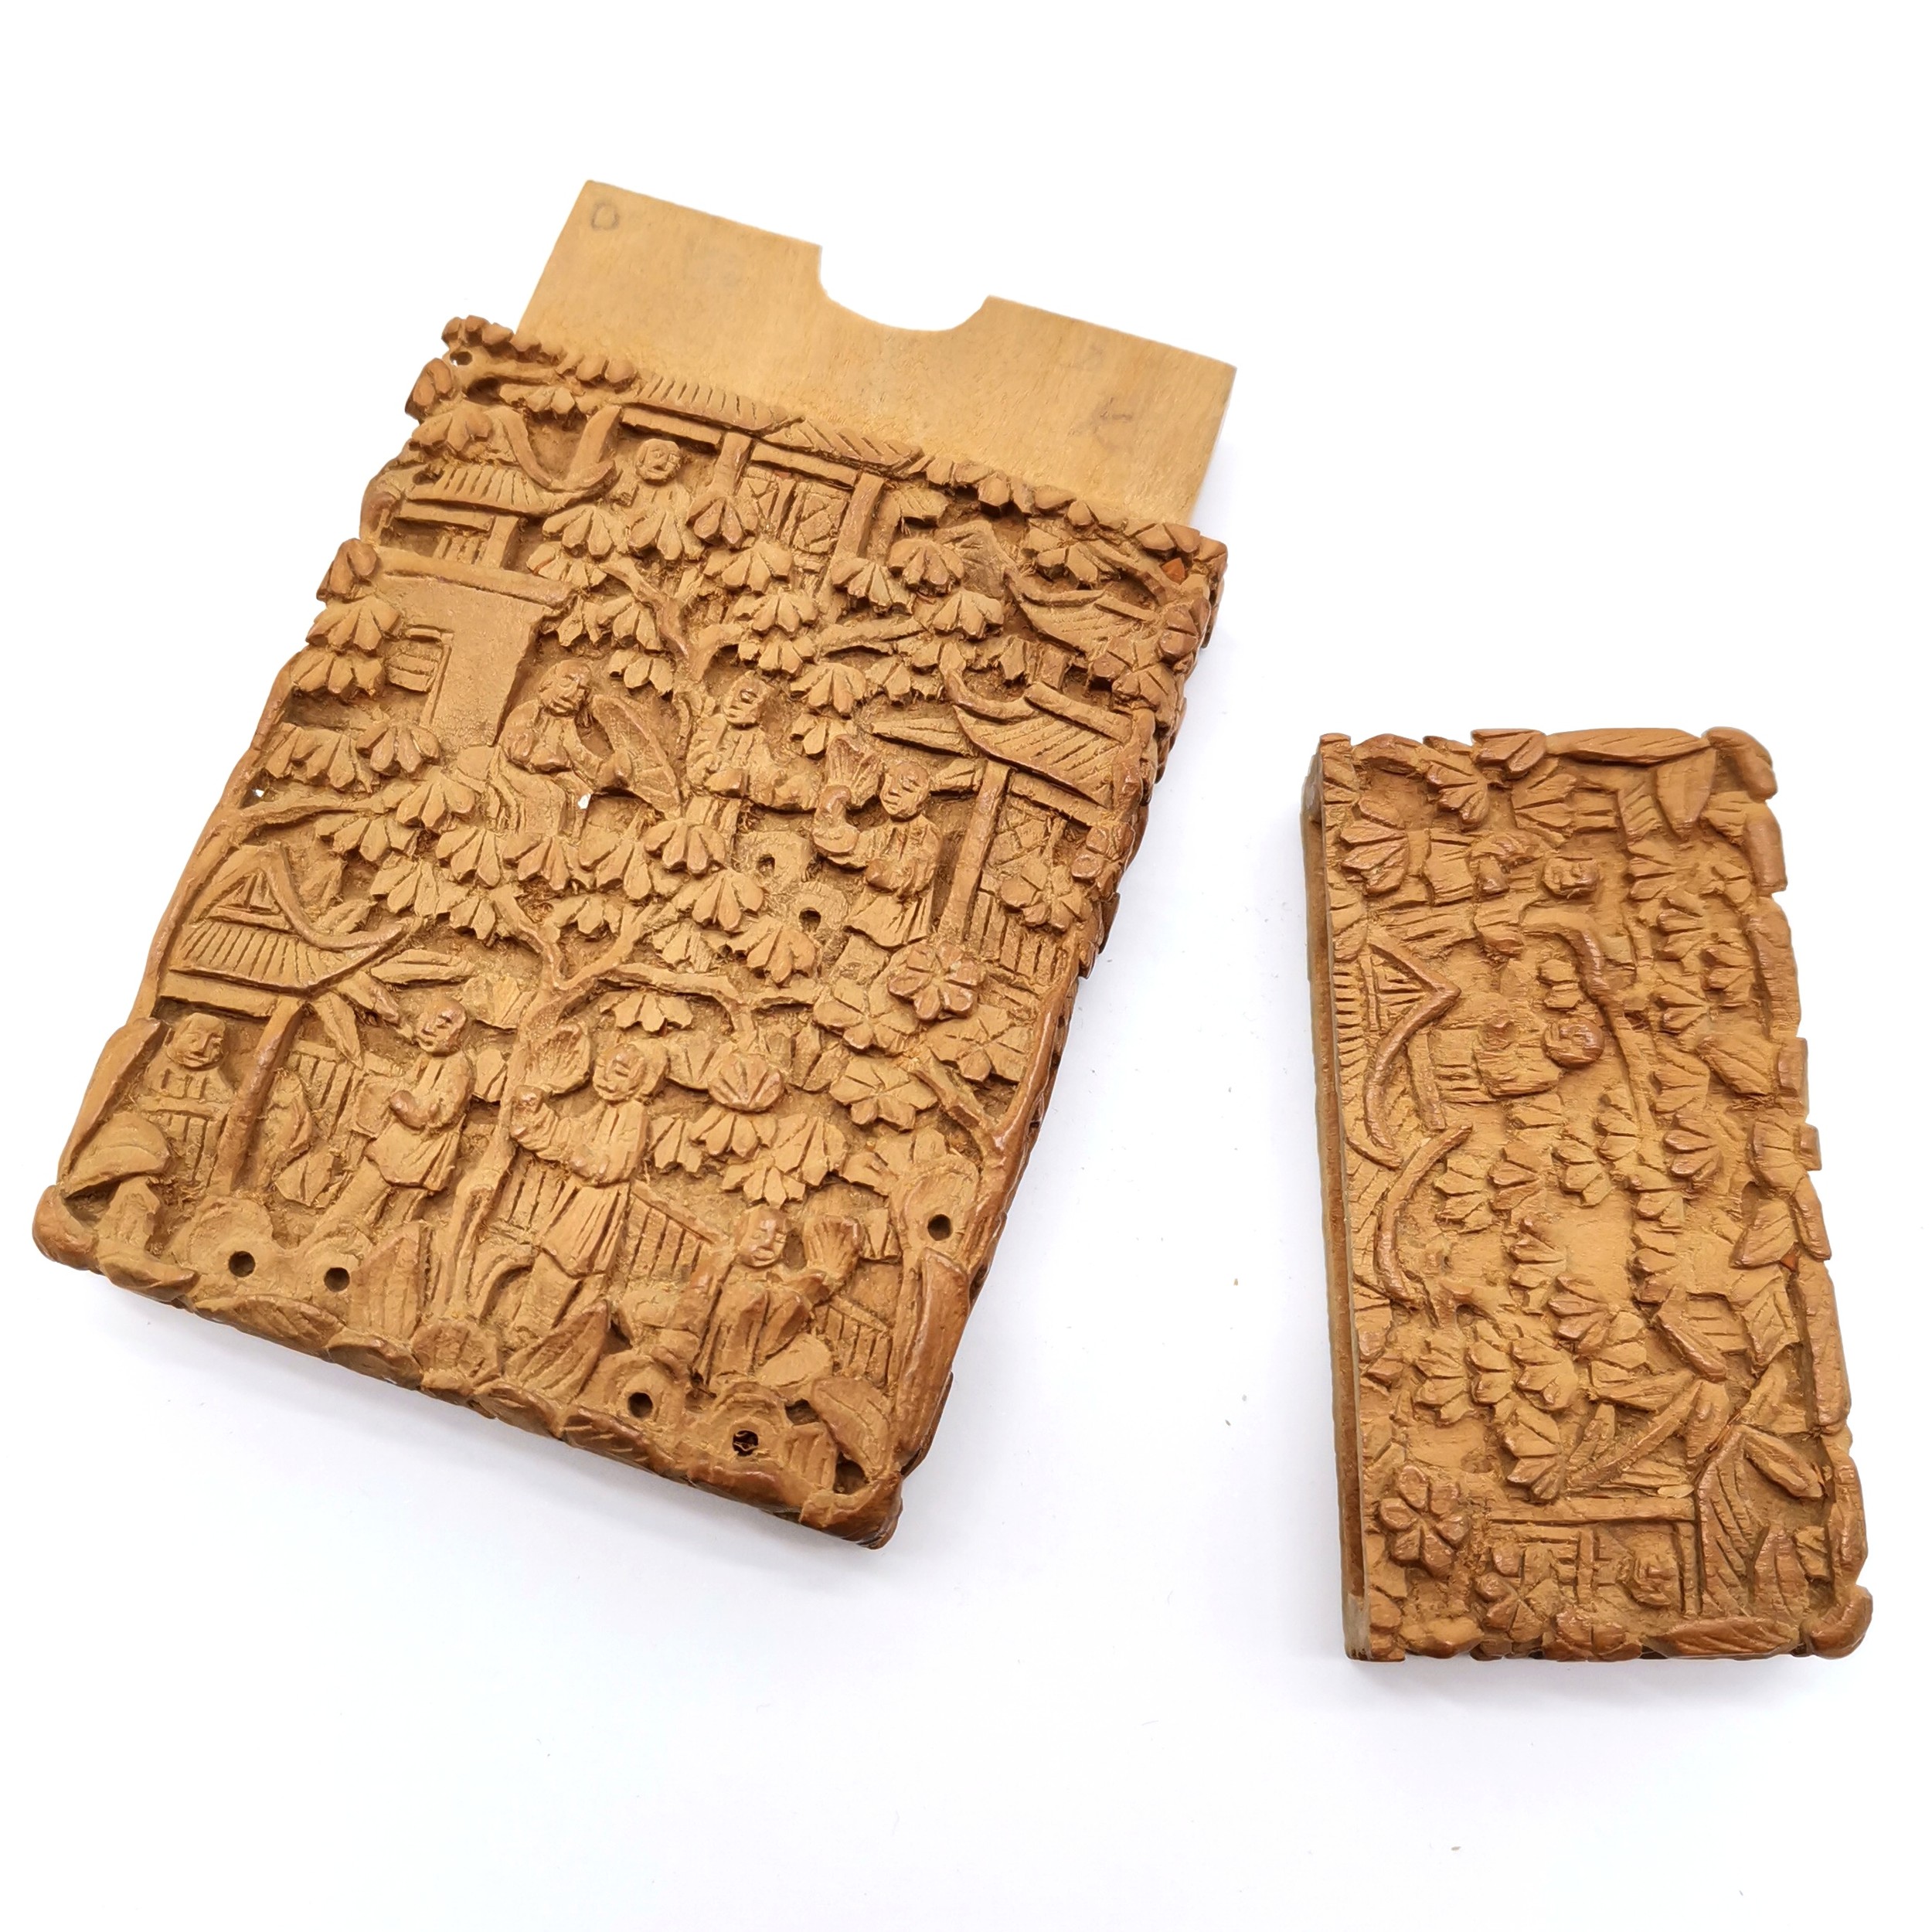 Antique Chinese Cantonese hand carved wooden card case - 9.6cm x 5.6cm & no obvious damage - Image 3 of 3